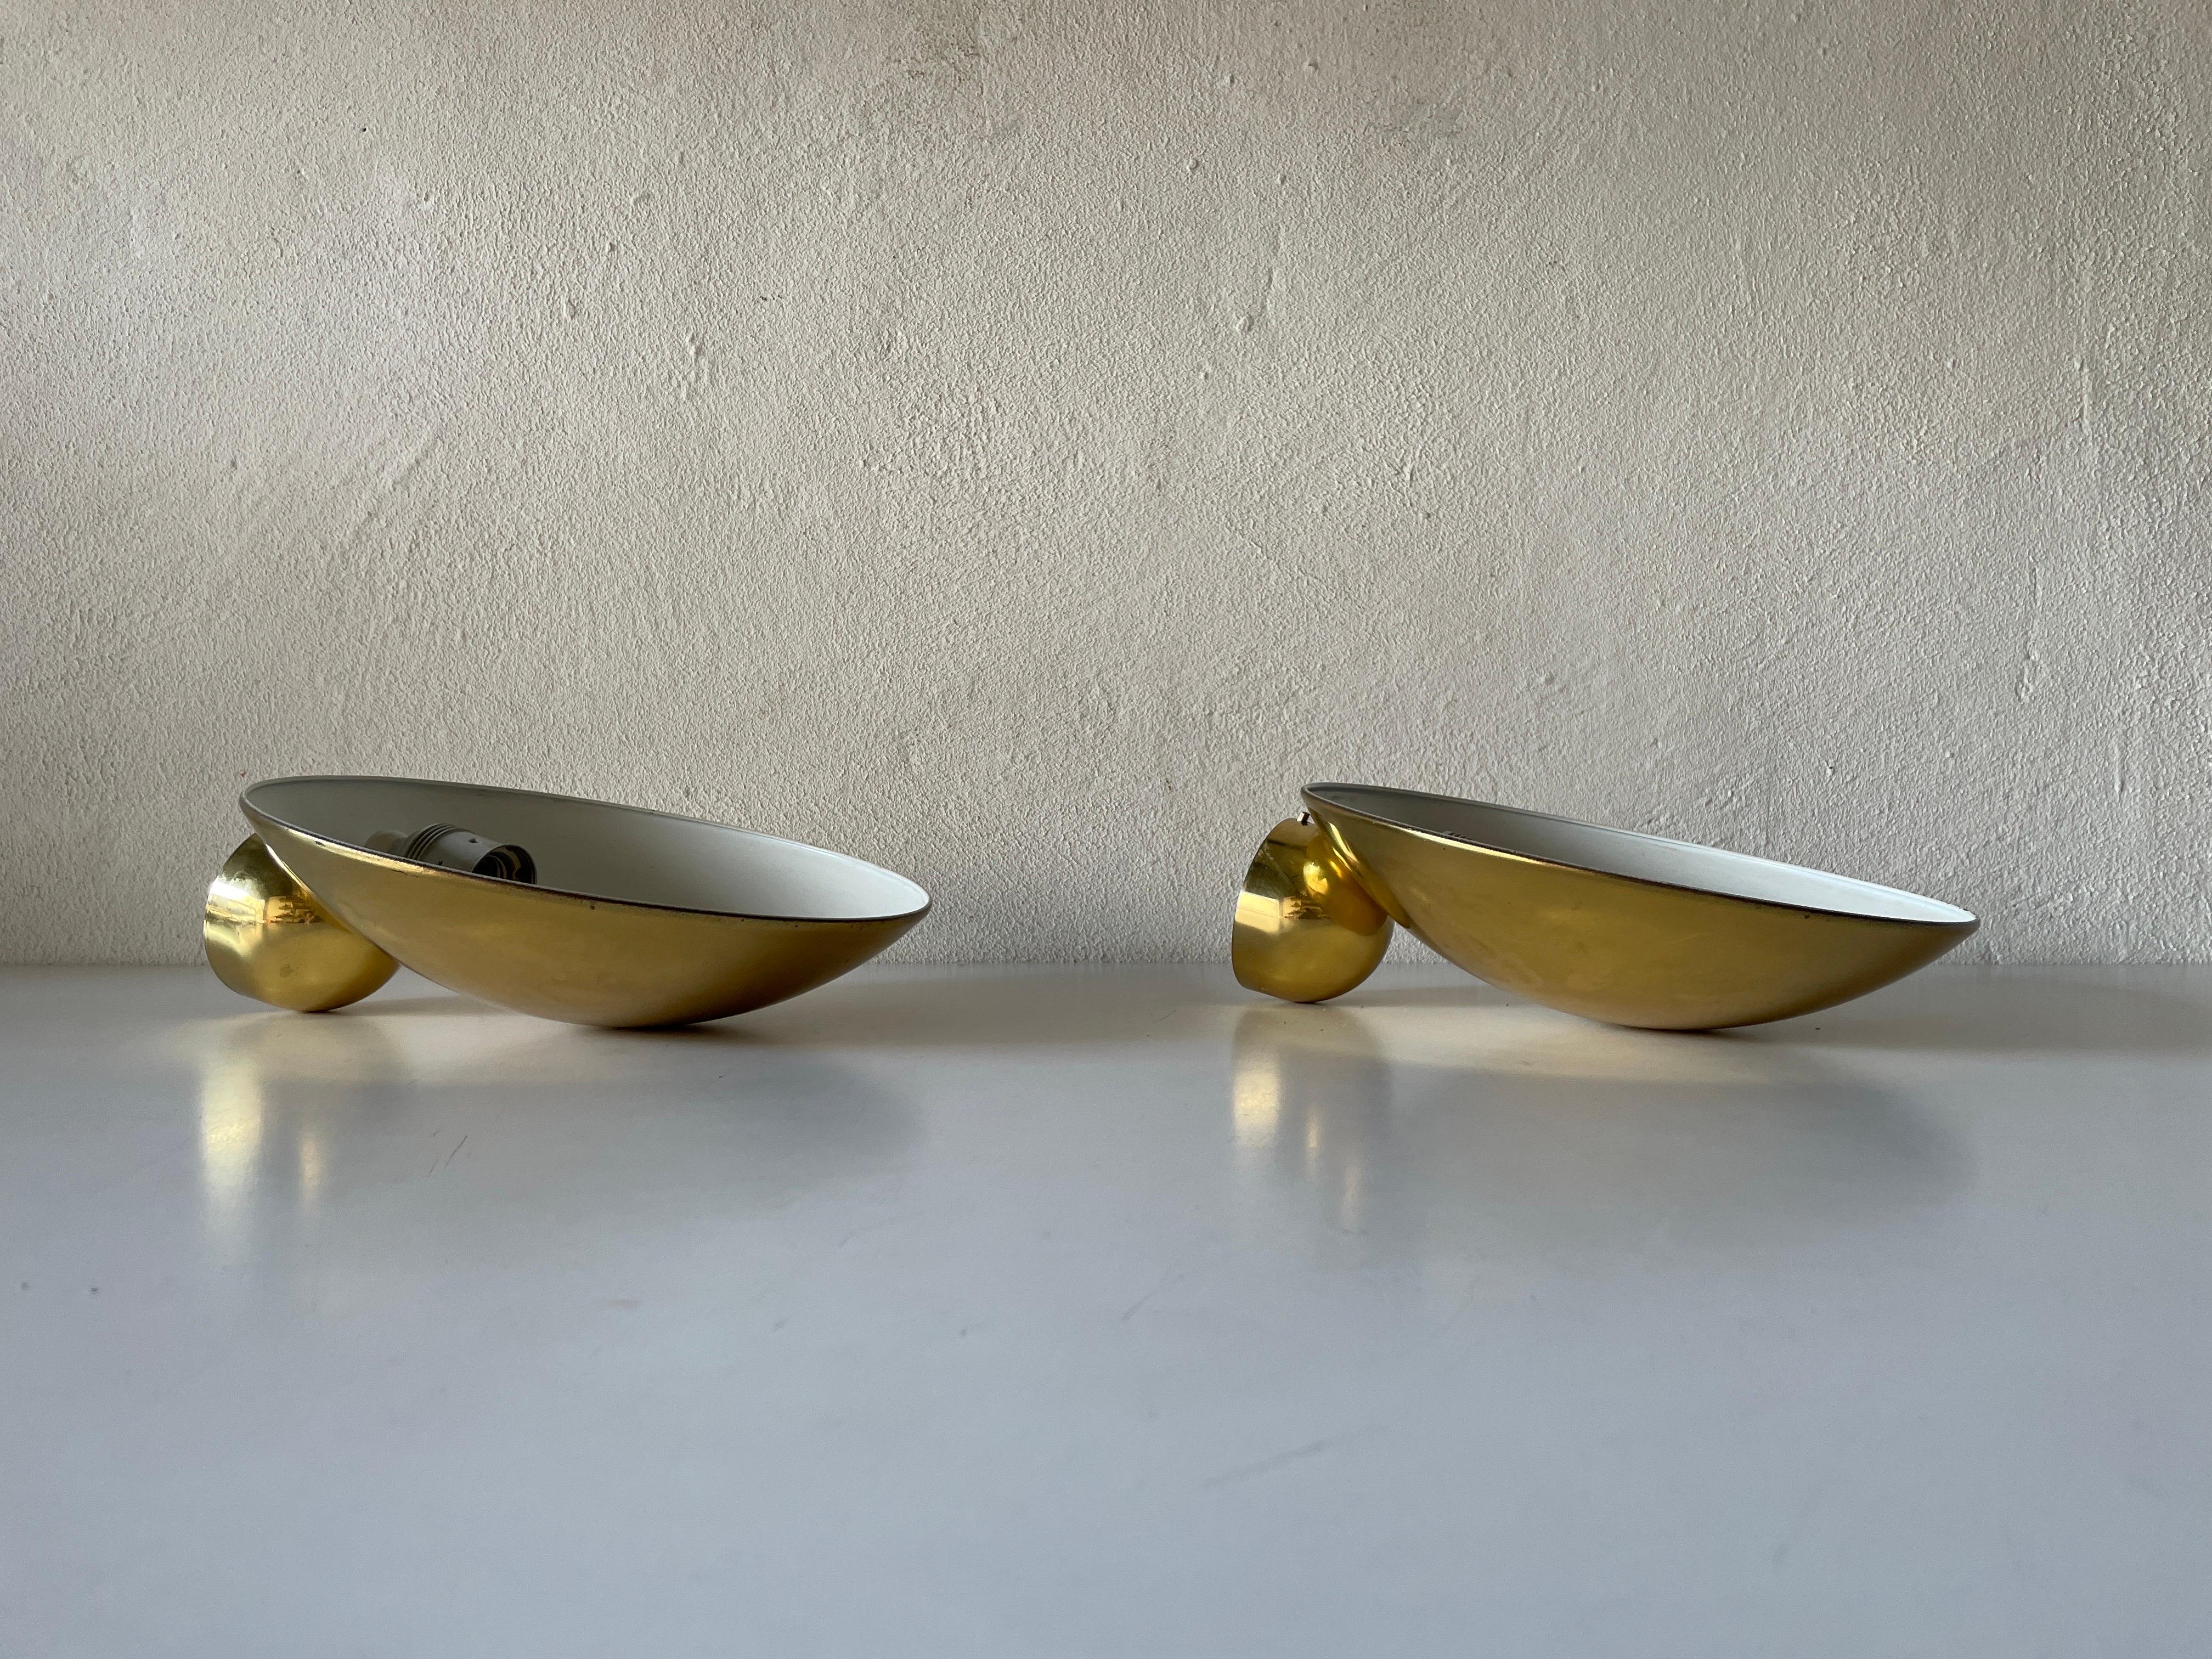 Exceptional Brass Pair of Sconces by Hustadt Leuchten, 1960s, Germany

Very elegant and Minimalist wall lamps.
Lamp is in very good condition.

These lamps works with E27 standard light bulbs. 
Wired and suitable to use in all countries. (110-220